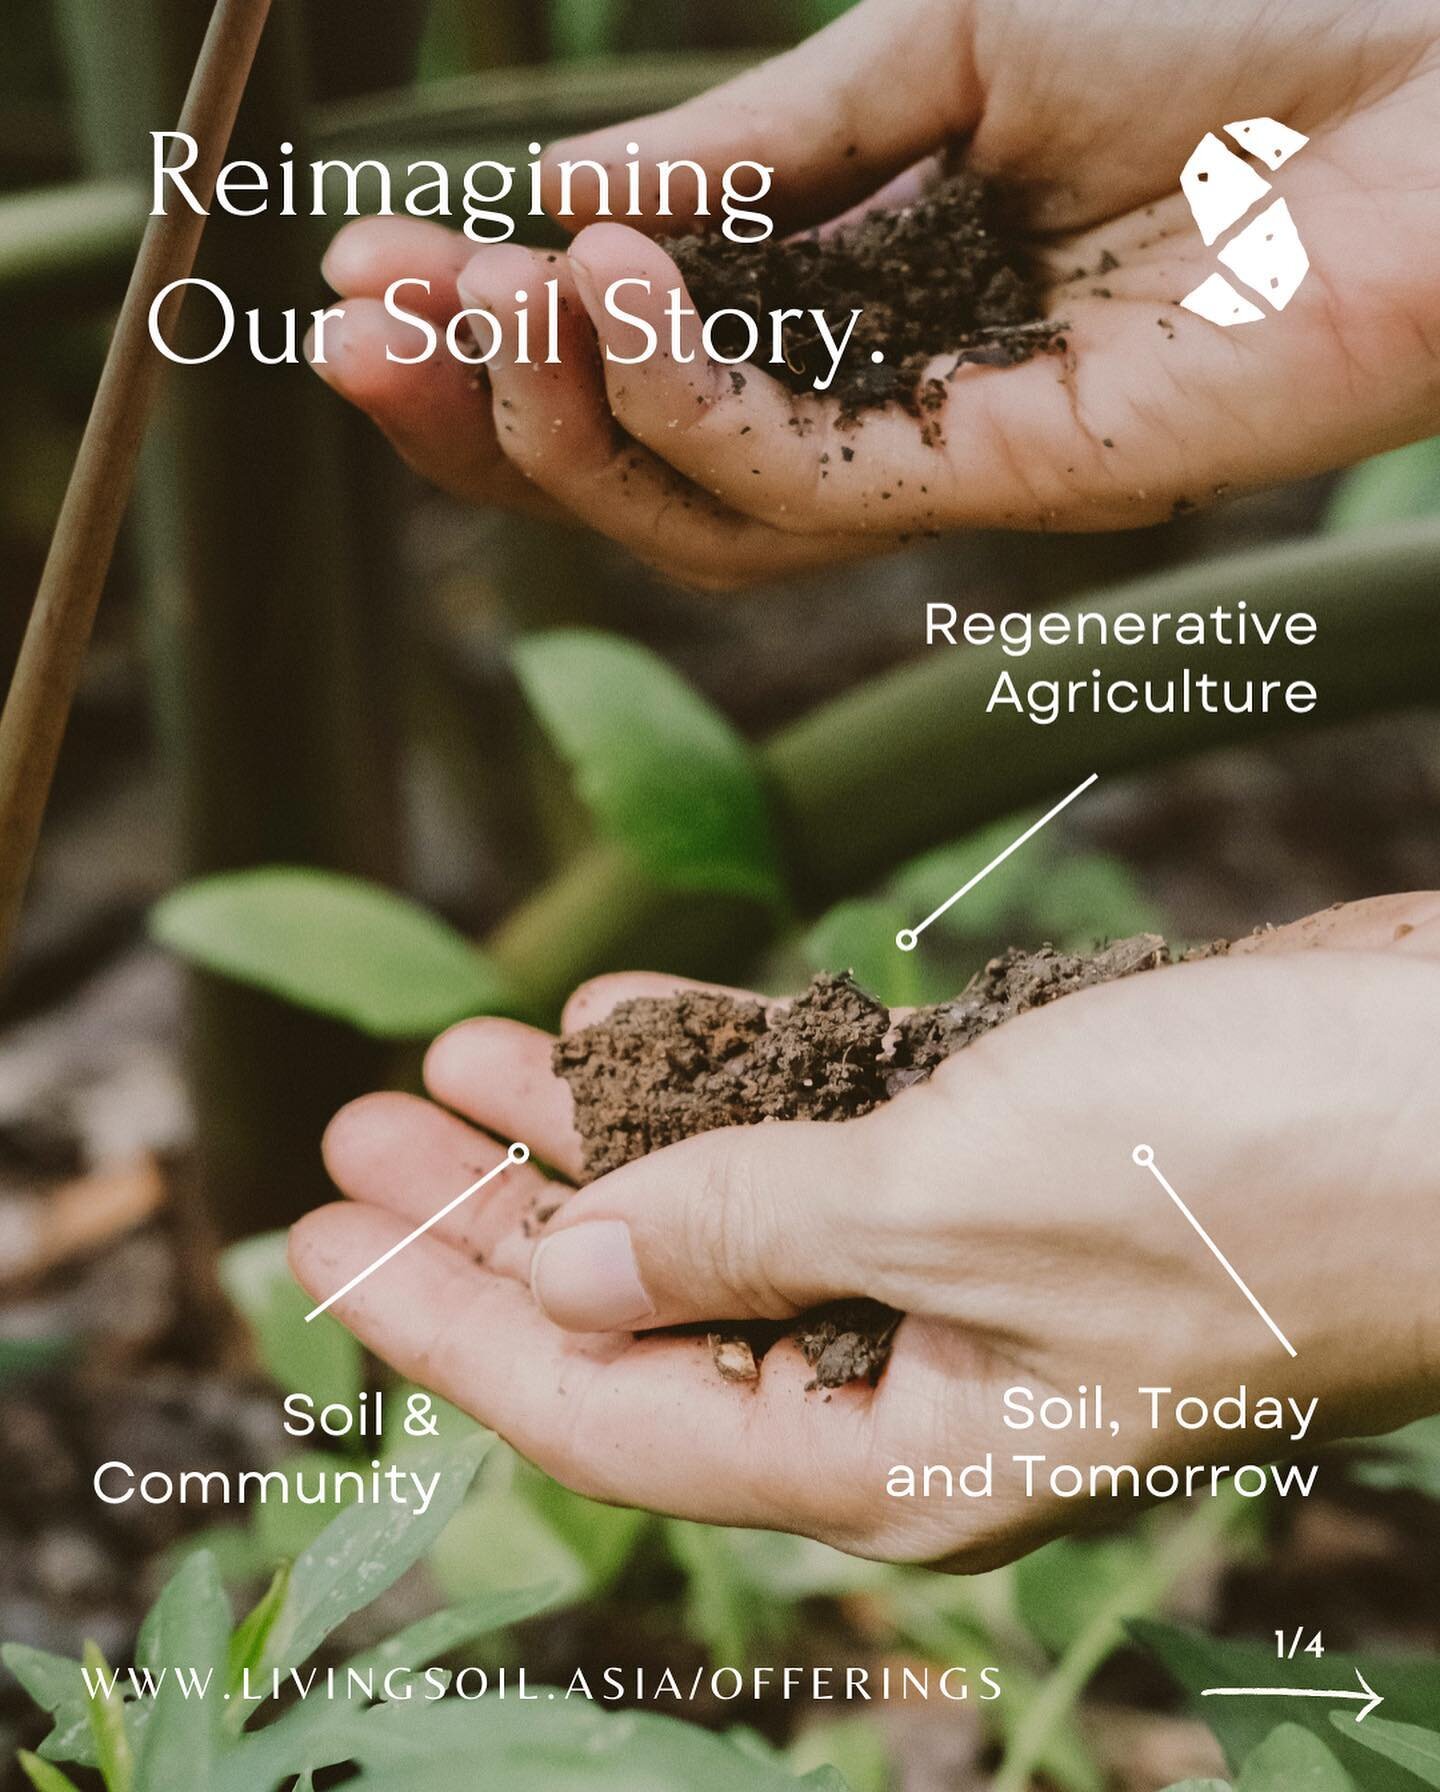 We have been told that Singapore has limited land and that our food future depends on agritech and not soil. 

What happens if we collectively embrace soil regeneration and adopt practices to heal and nourish our soils?

How does this in turn help us